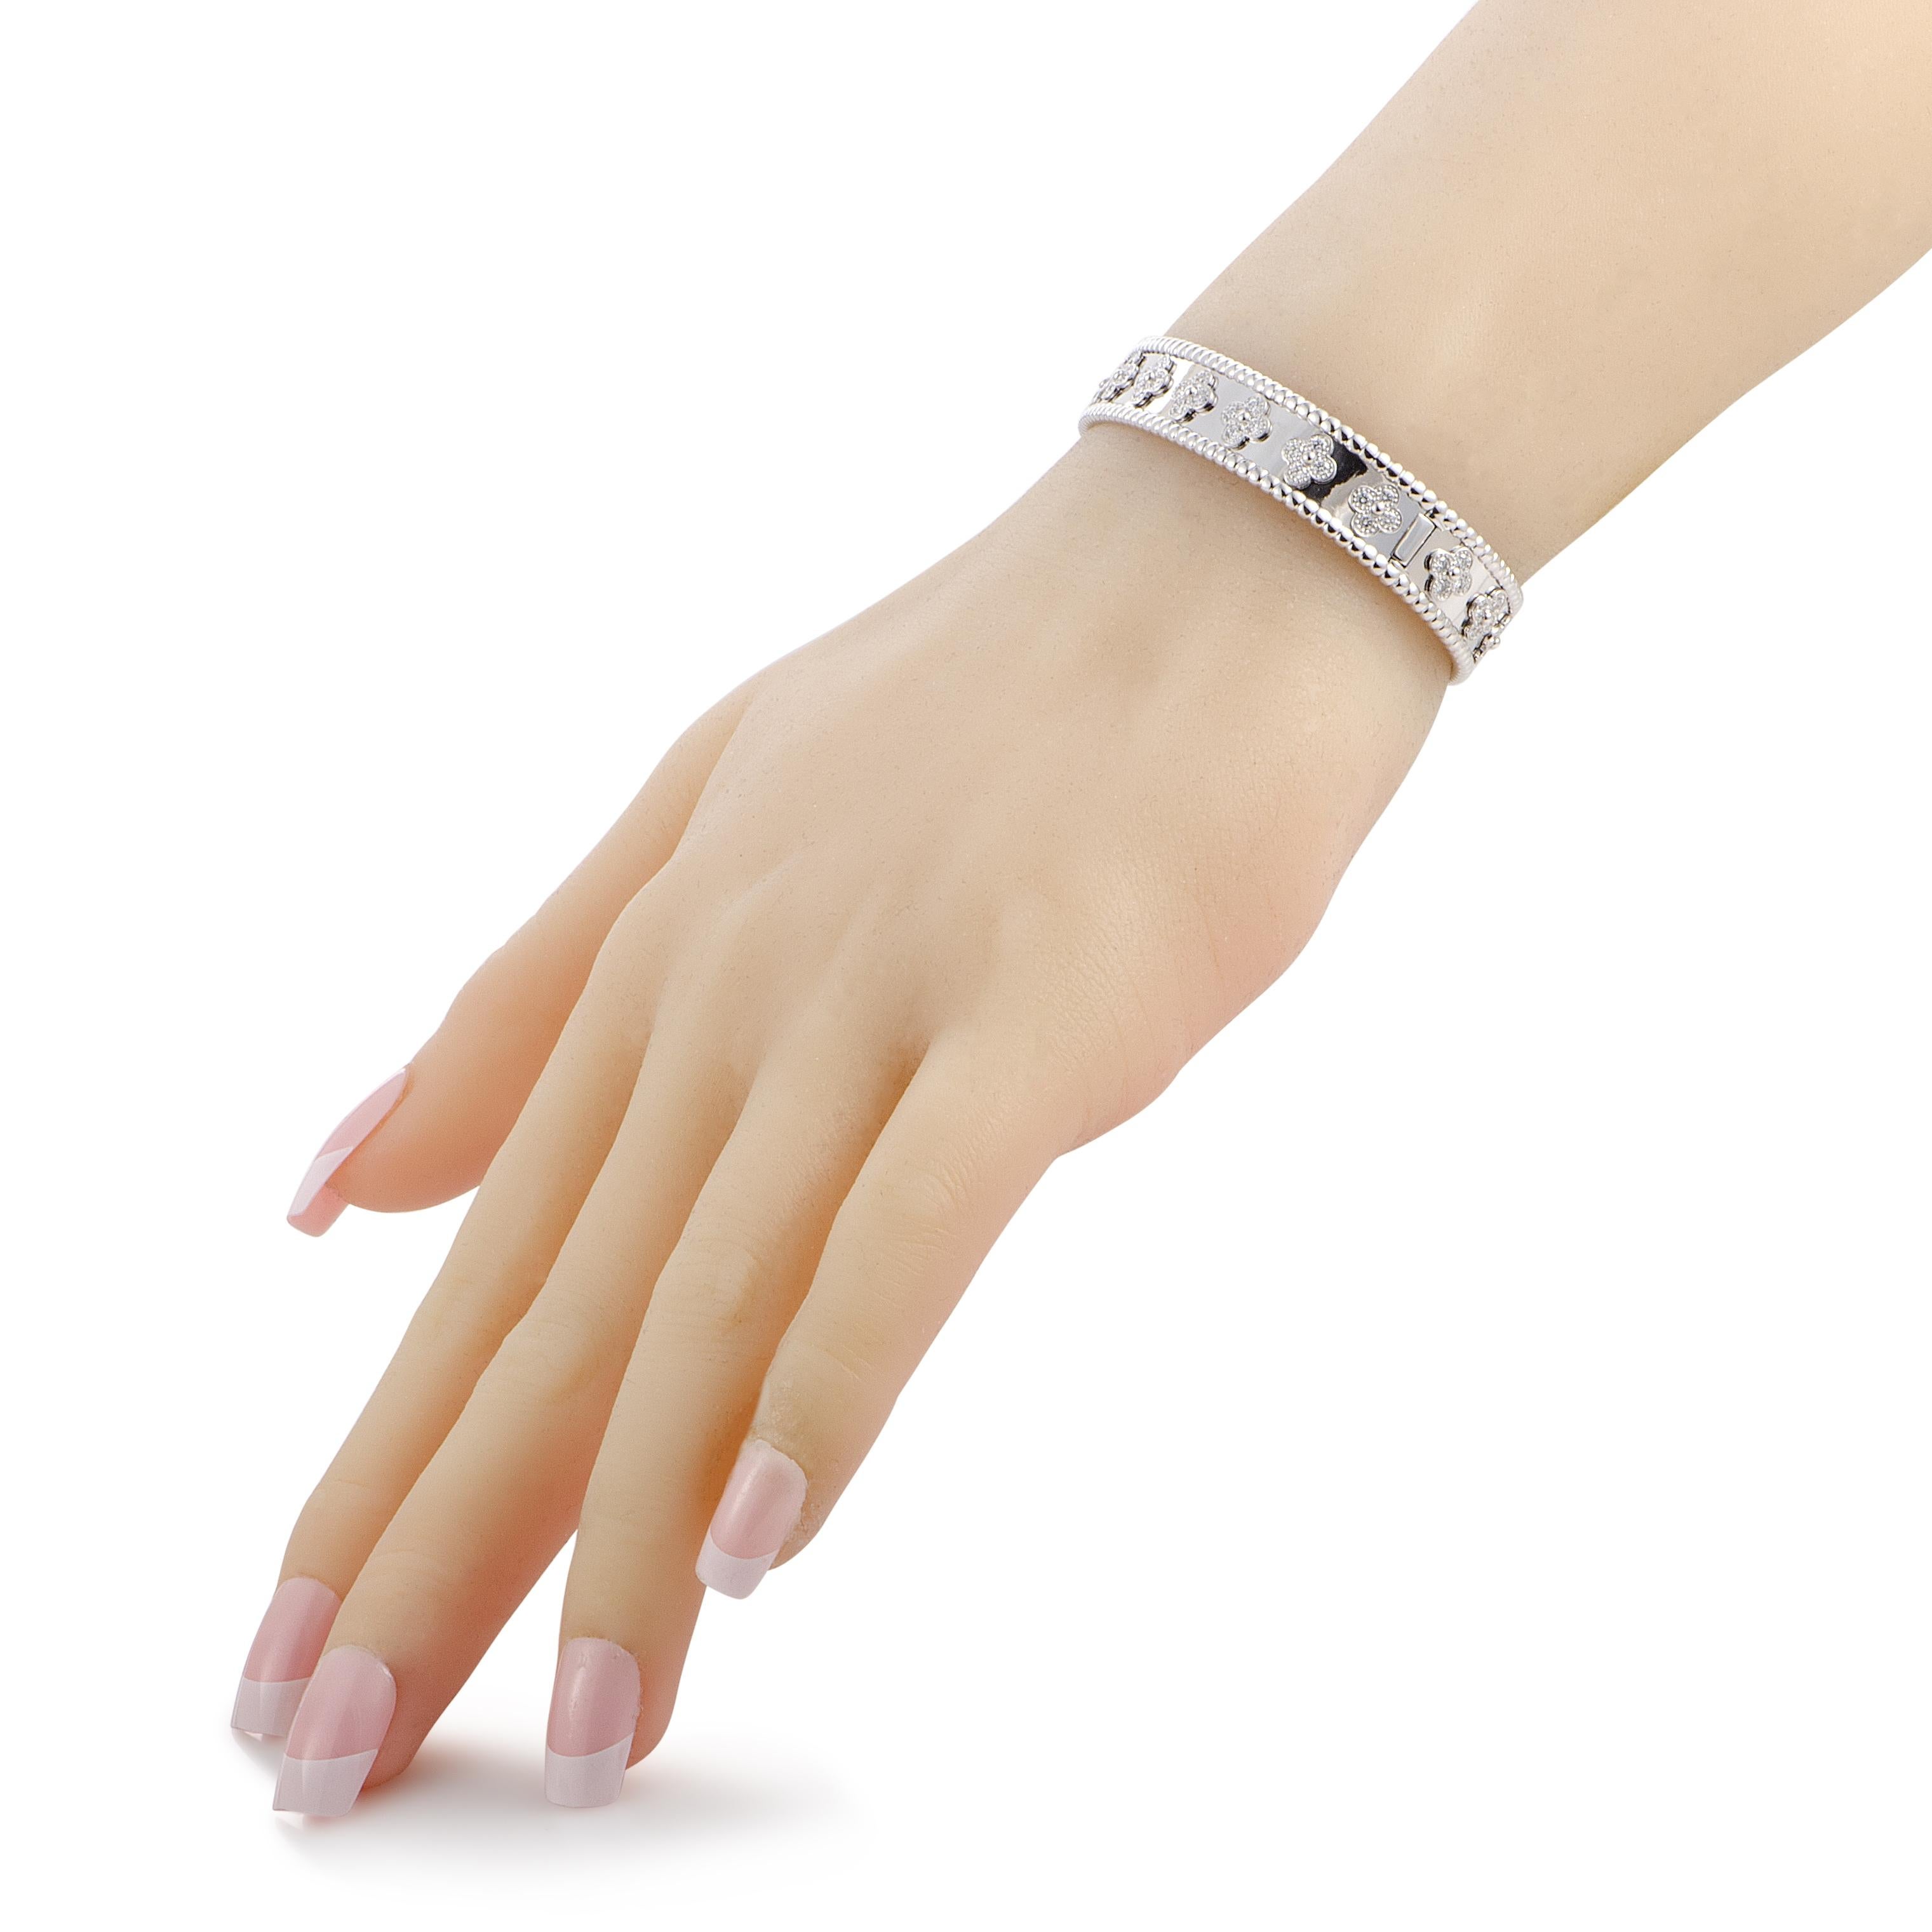 The Van Cleef & Arpels “Perlée” bracelet is made of 18K white gold and set with diamonds. It weighs 32.6 grams, measuring 7.00” in length and boasting a diameter of 2.25” (size S).

Offered in estate condition, this item includes the manufacturer’s